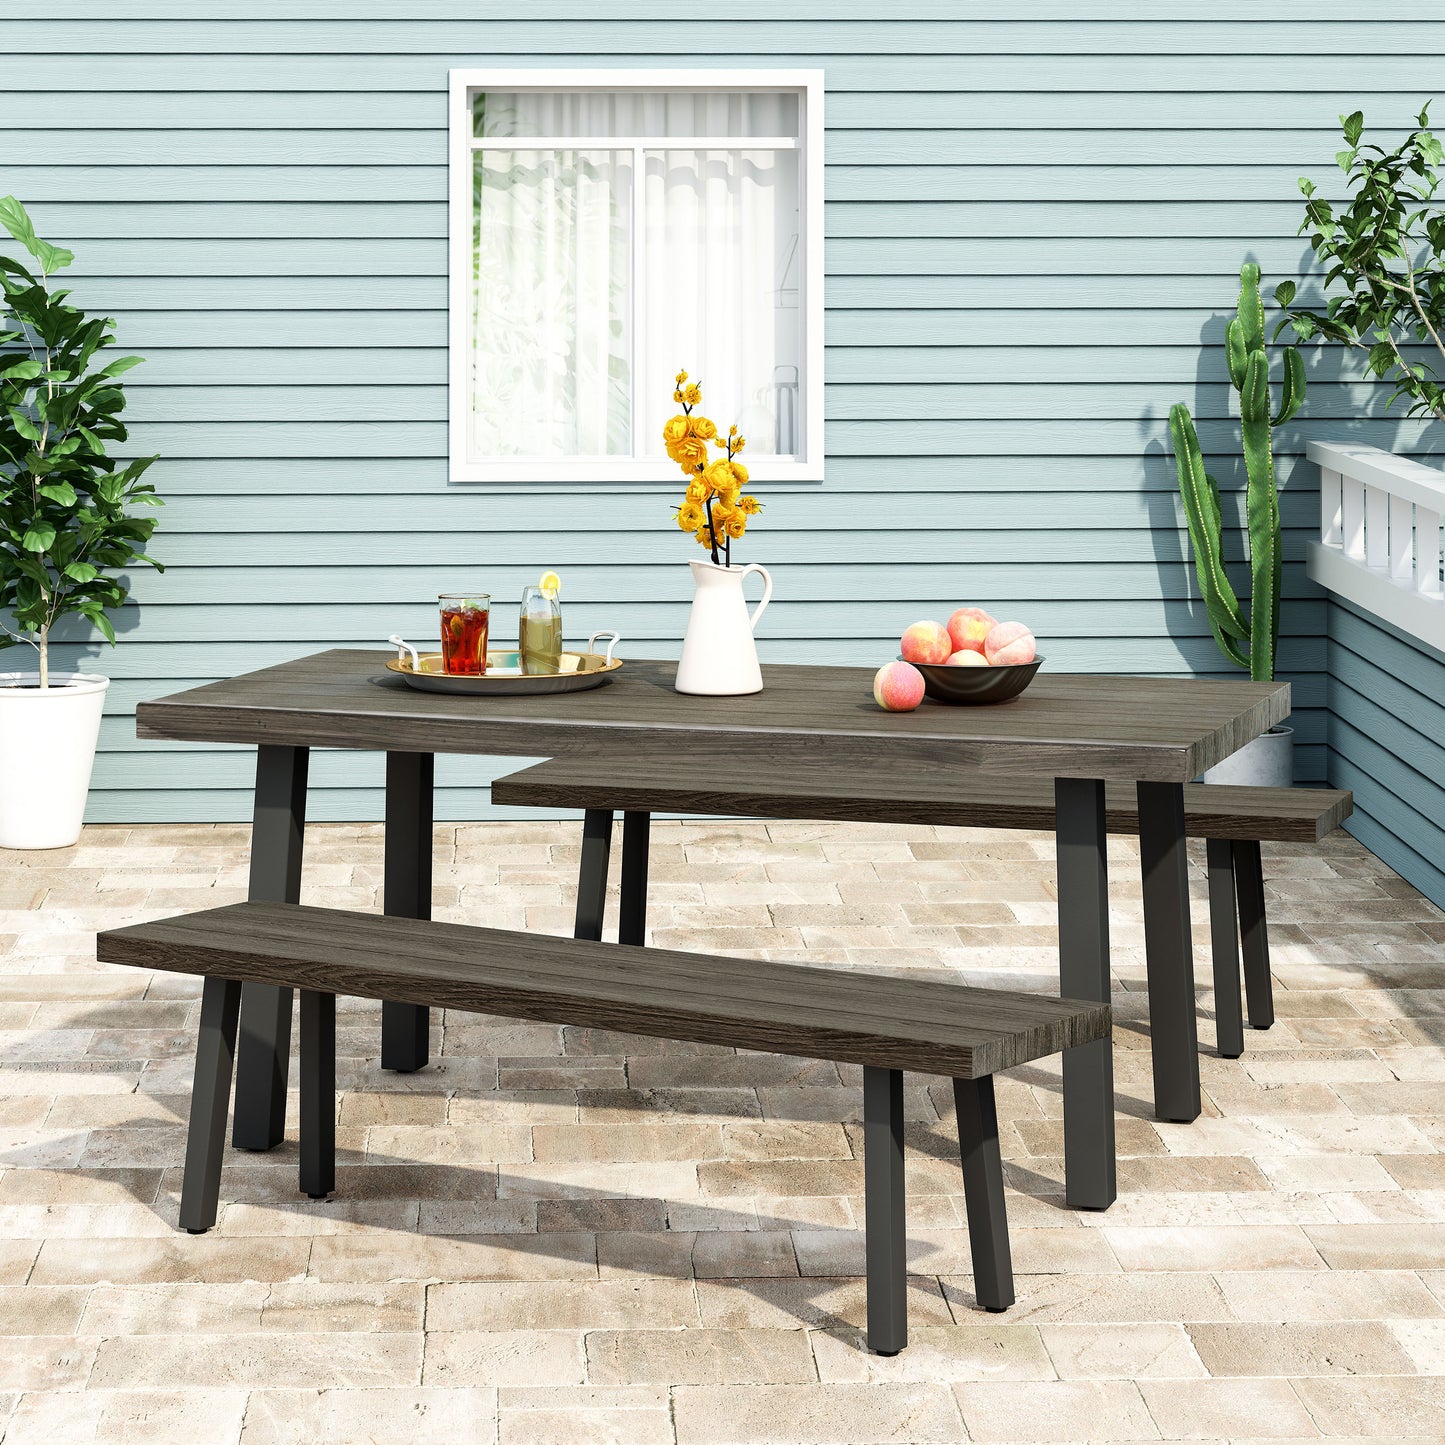 Altair Outdoor Modern Industrial 3 Piece Aluminum Dining Set with Benches